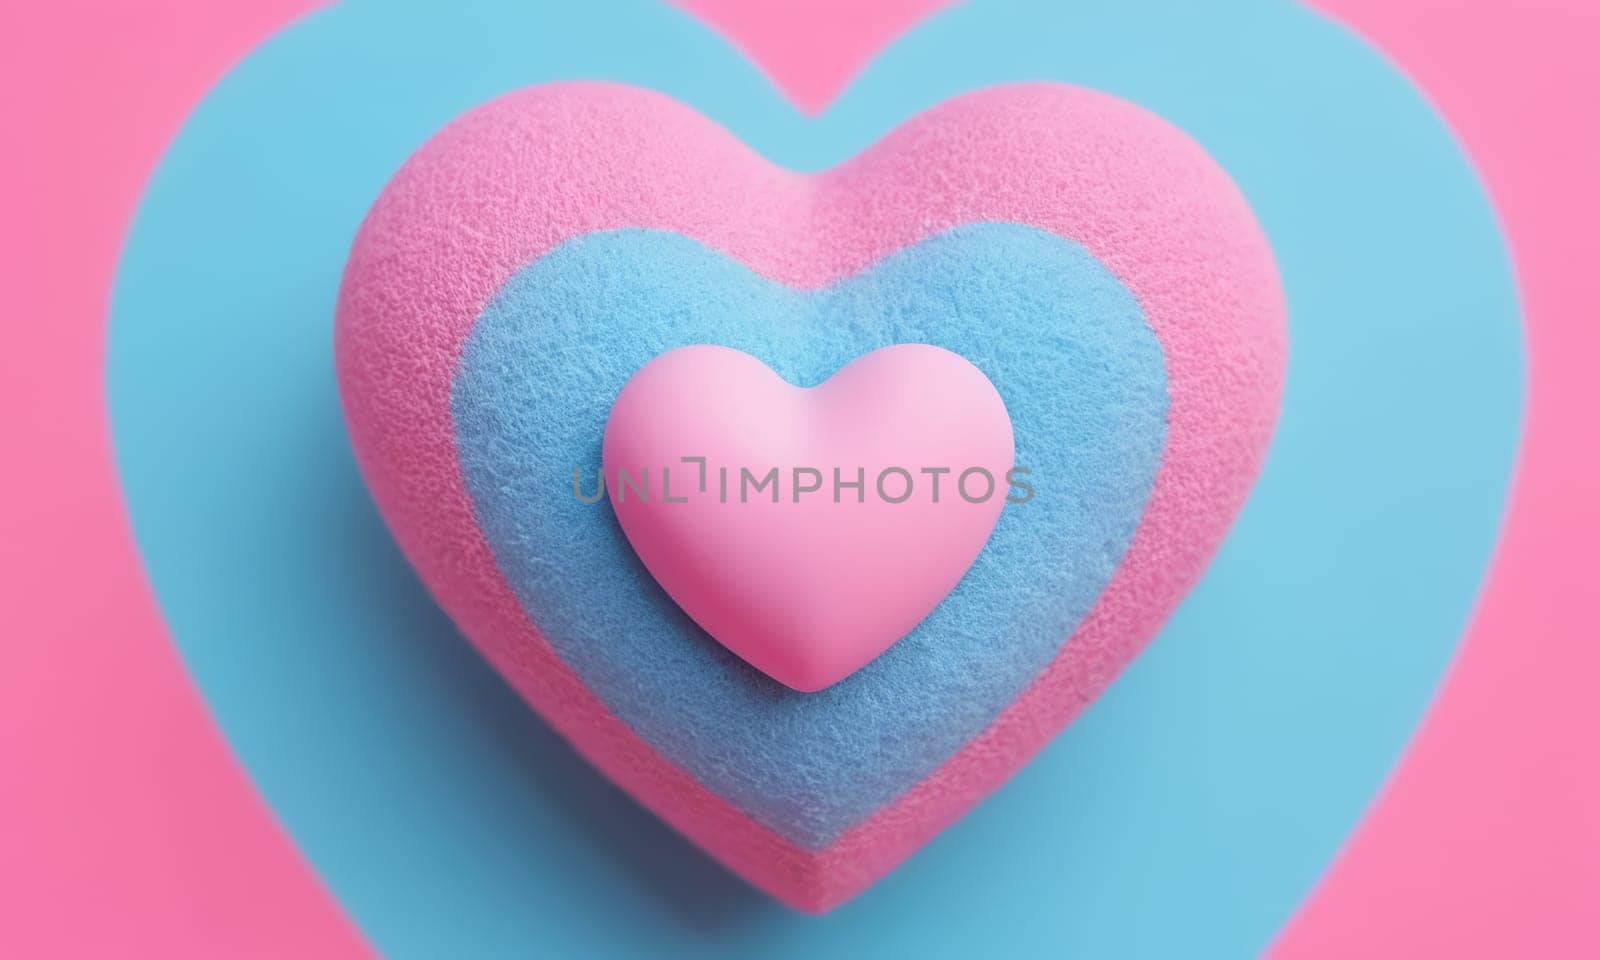 A glossy pink heart stands out against a vibrant blue background. The image exudes warmth and affection and is perfect for themes of love and romance. Ideal for Valentine s Day promotions or expressing sentiments of love.